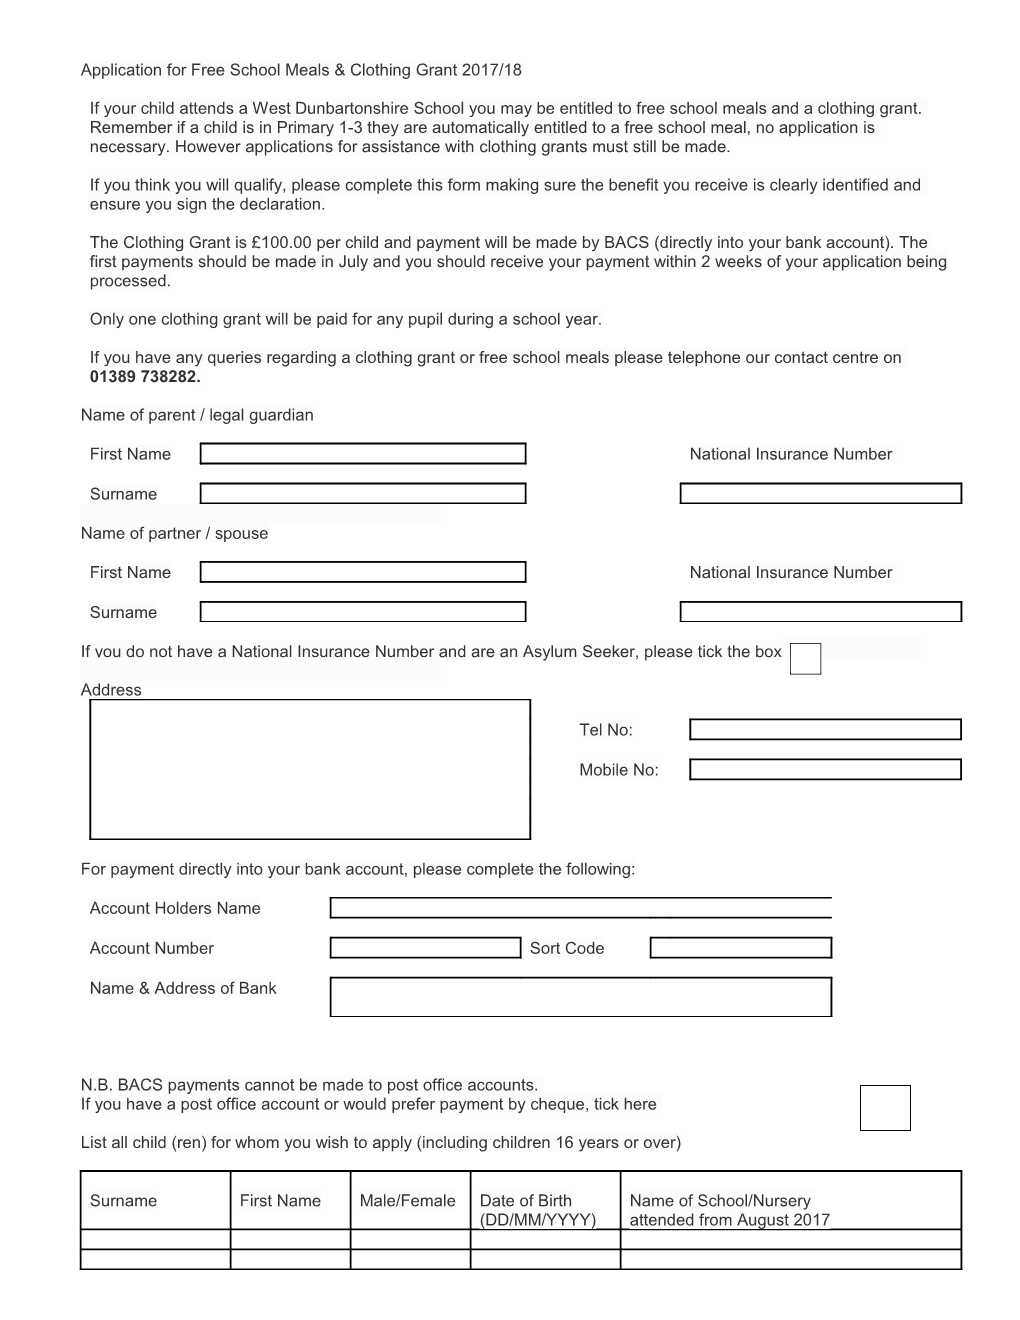 Application for Free School Meals & Clothing Grant 2011/12